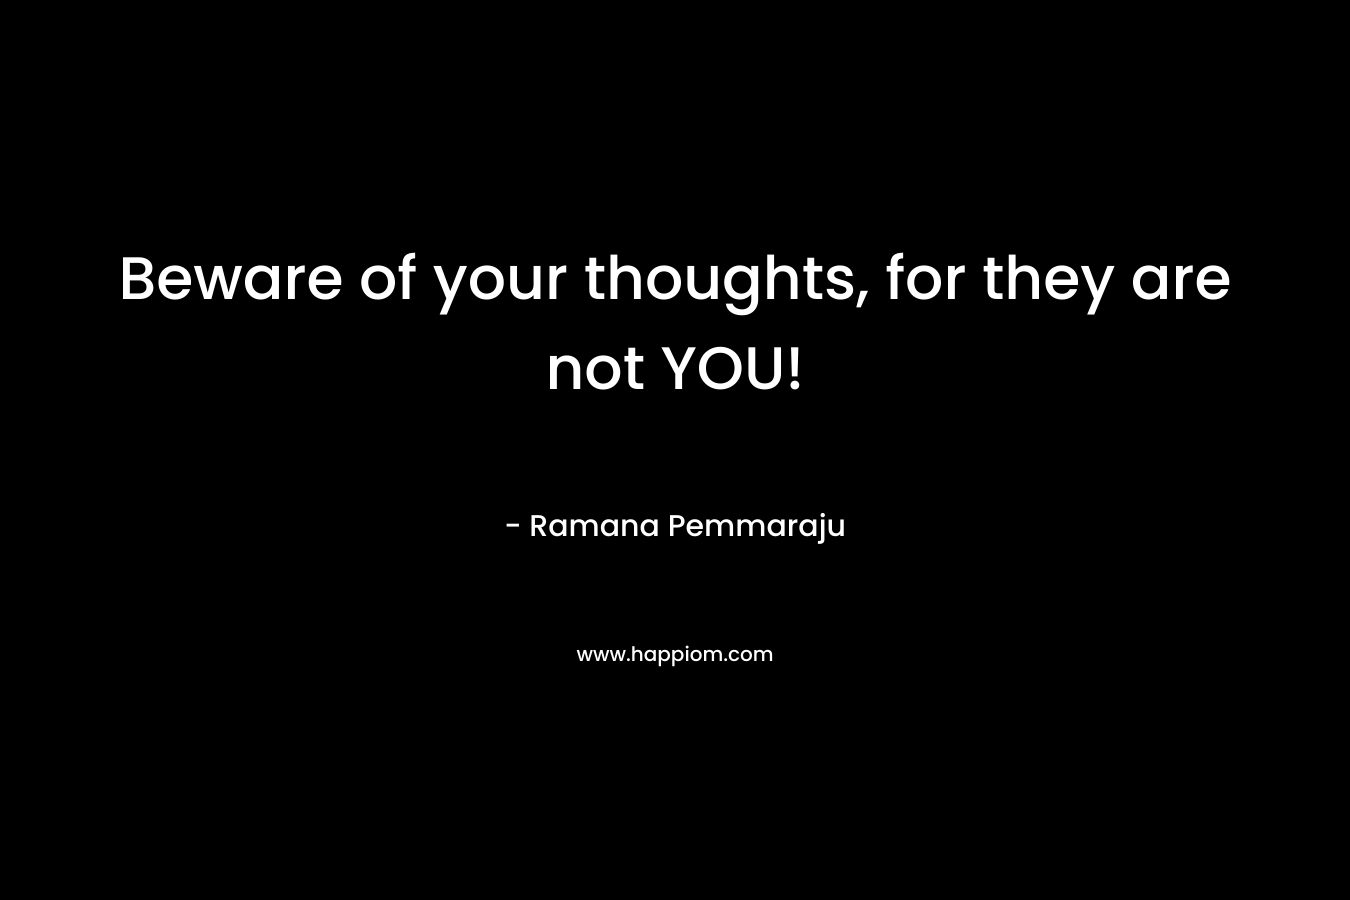 Beware of your thoughts, for they are not YOU!